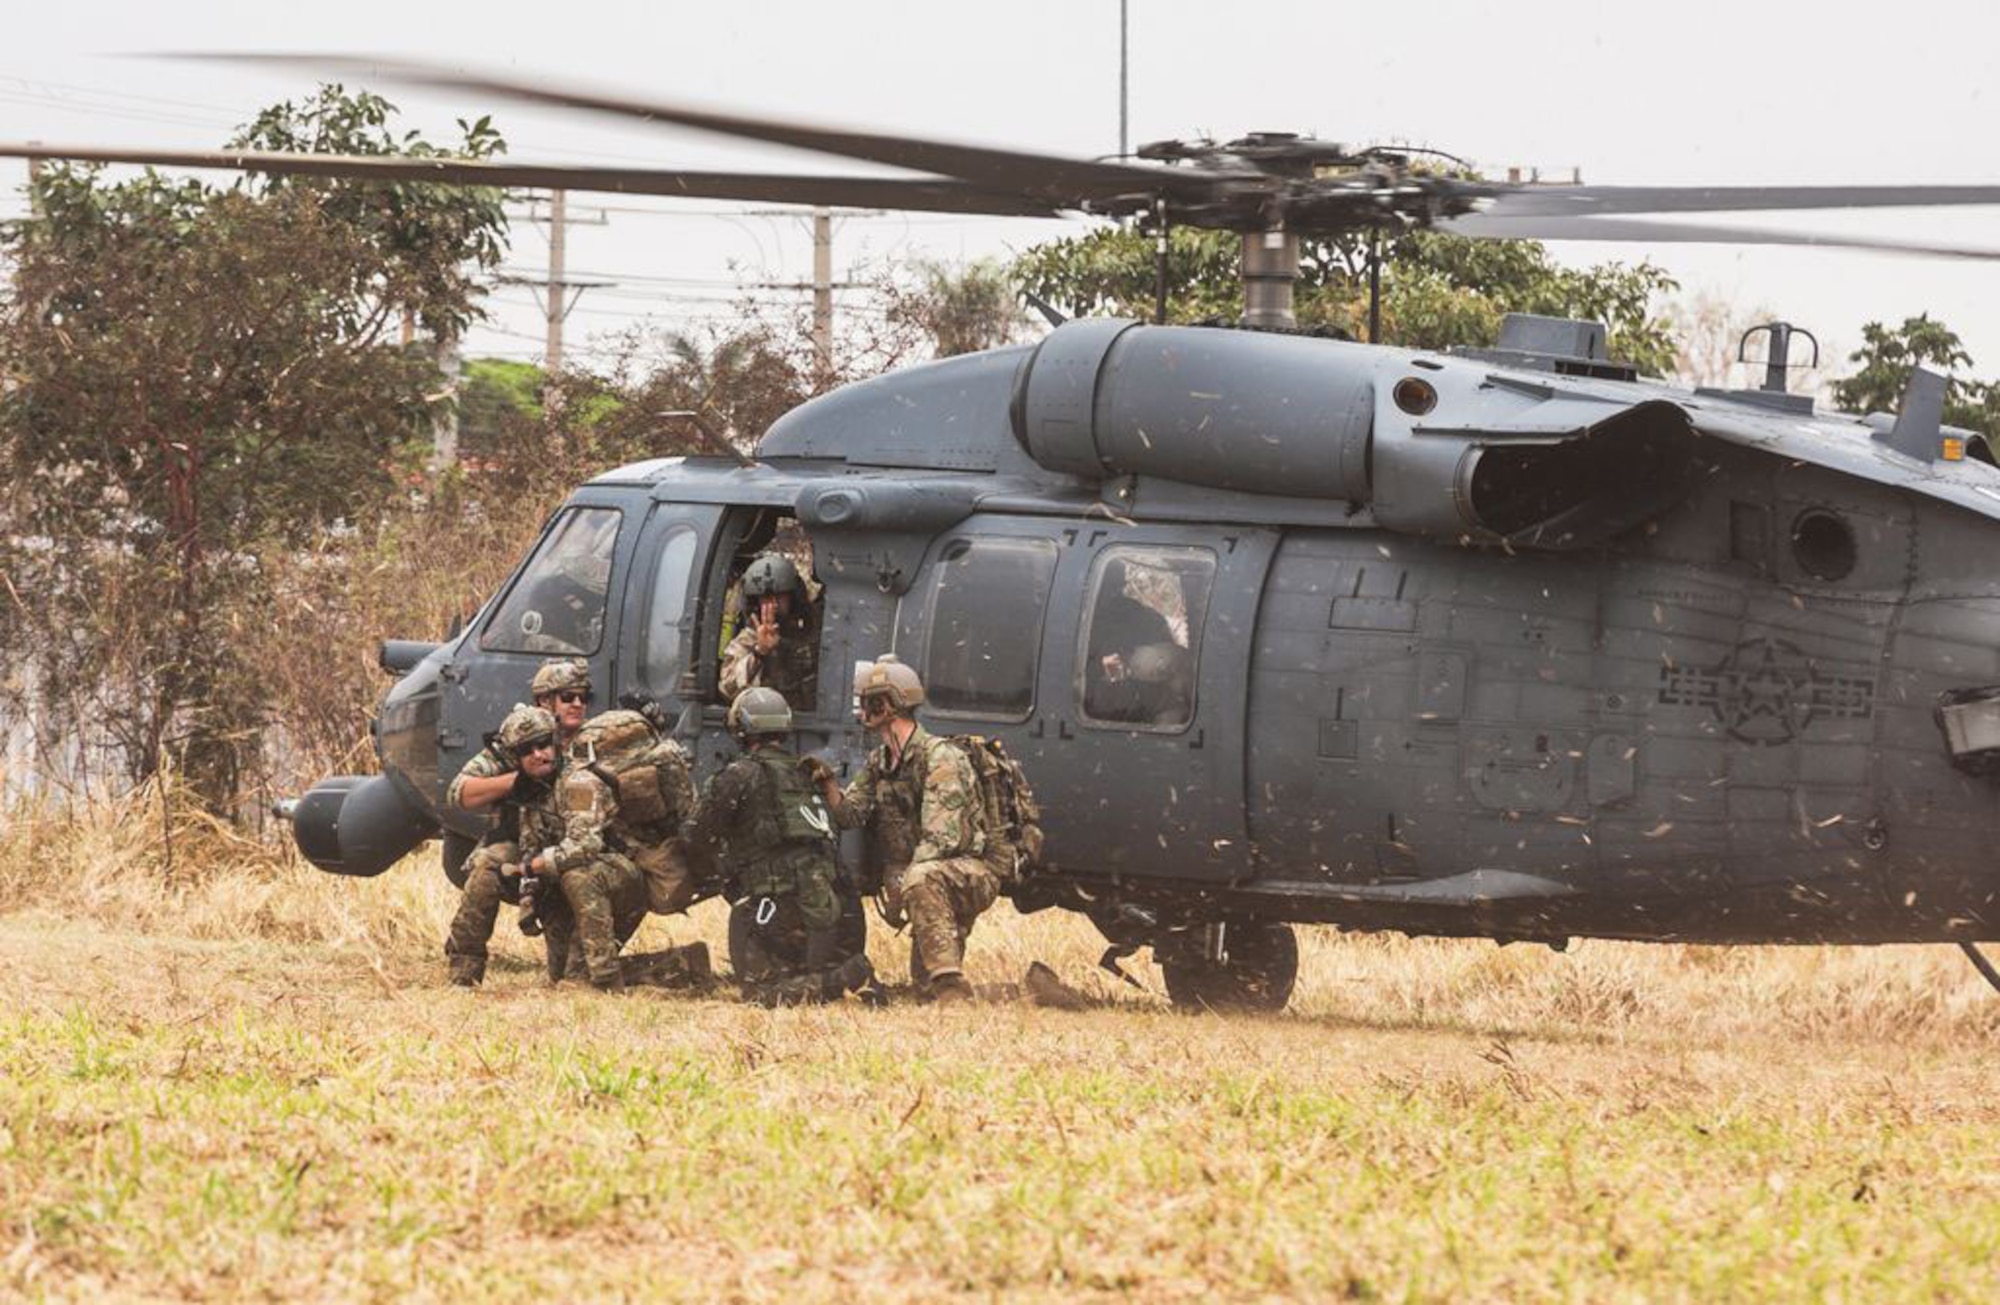 Brazilian airmen and pararescue Airmen from the New York Air National Guard's 106th Rescue Wing exit an HH-60 Pave Hawk  while participating in Exercise Tapio 2021 at Campo Grande Air Base, Campo Grande, Brazil. The exercise Aug. 19-31 was part of the National Guard's State Partnership Program.